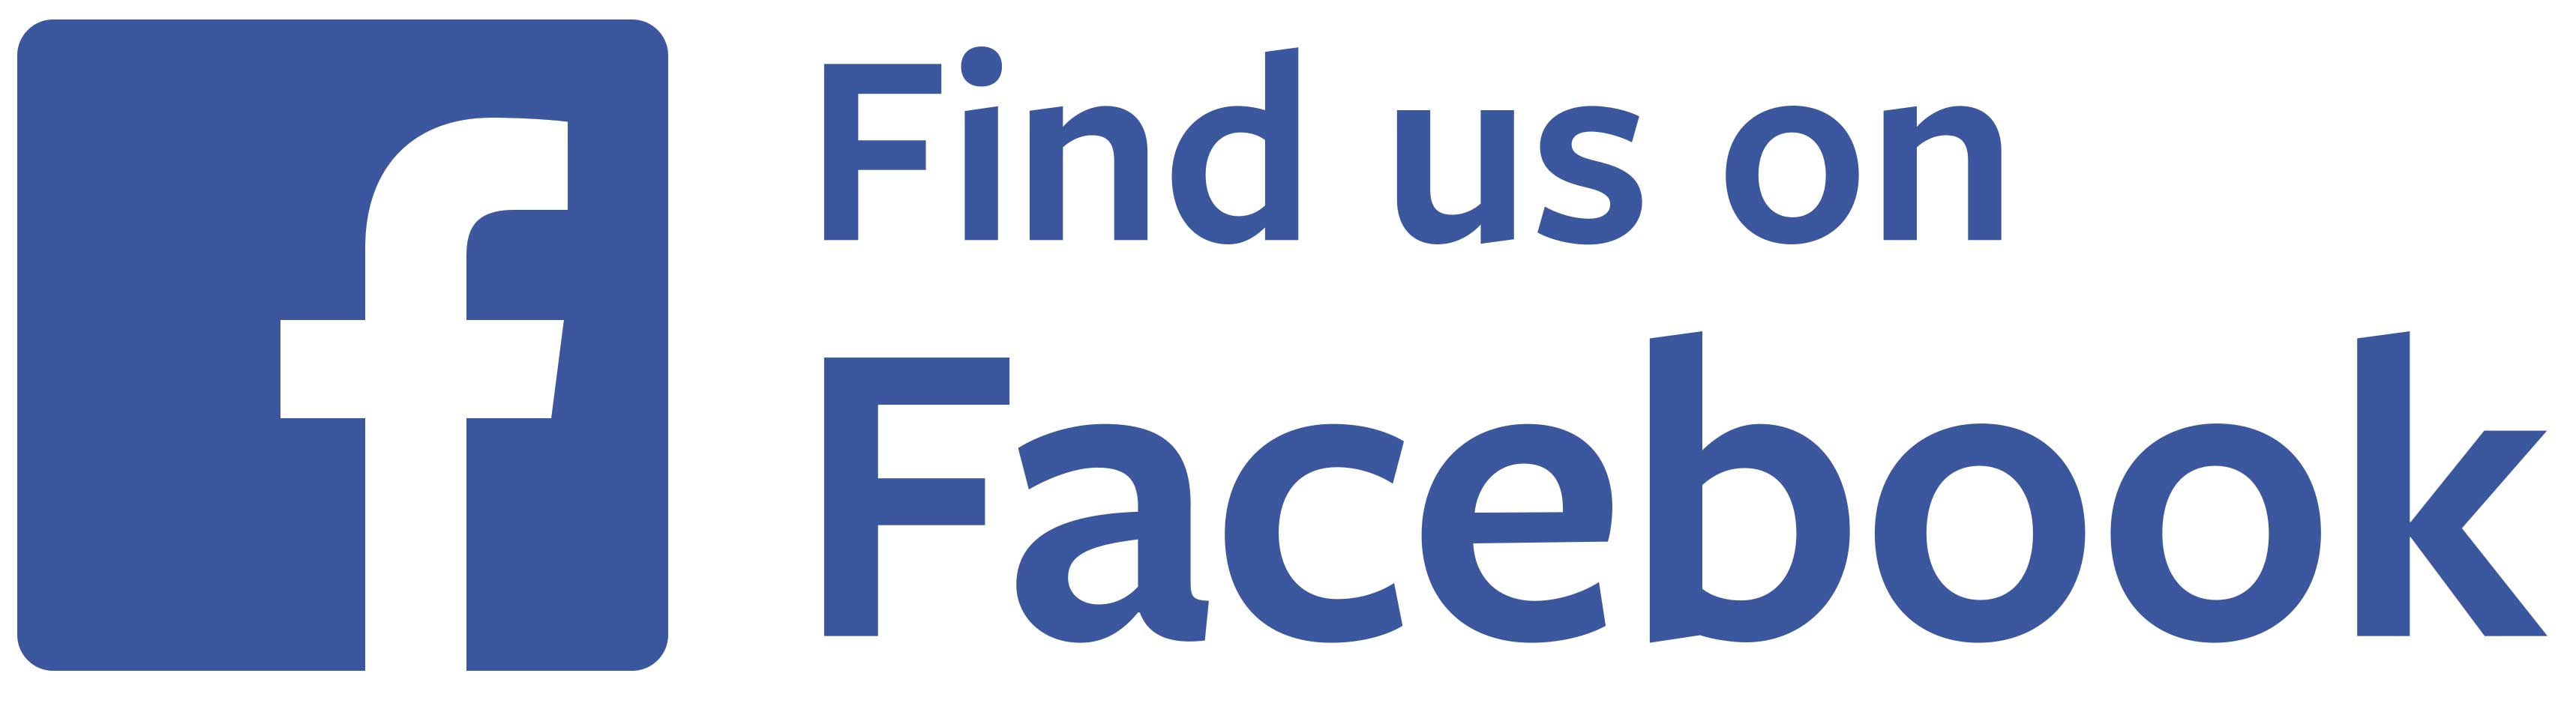 Find Us On Facebook Logo - facebook - RMHC Tallahassee